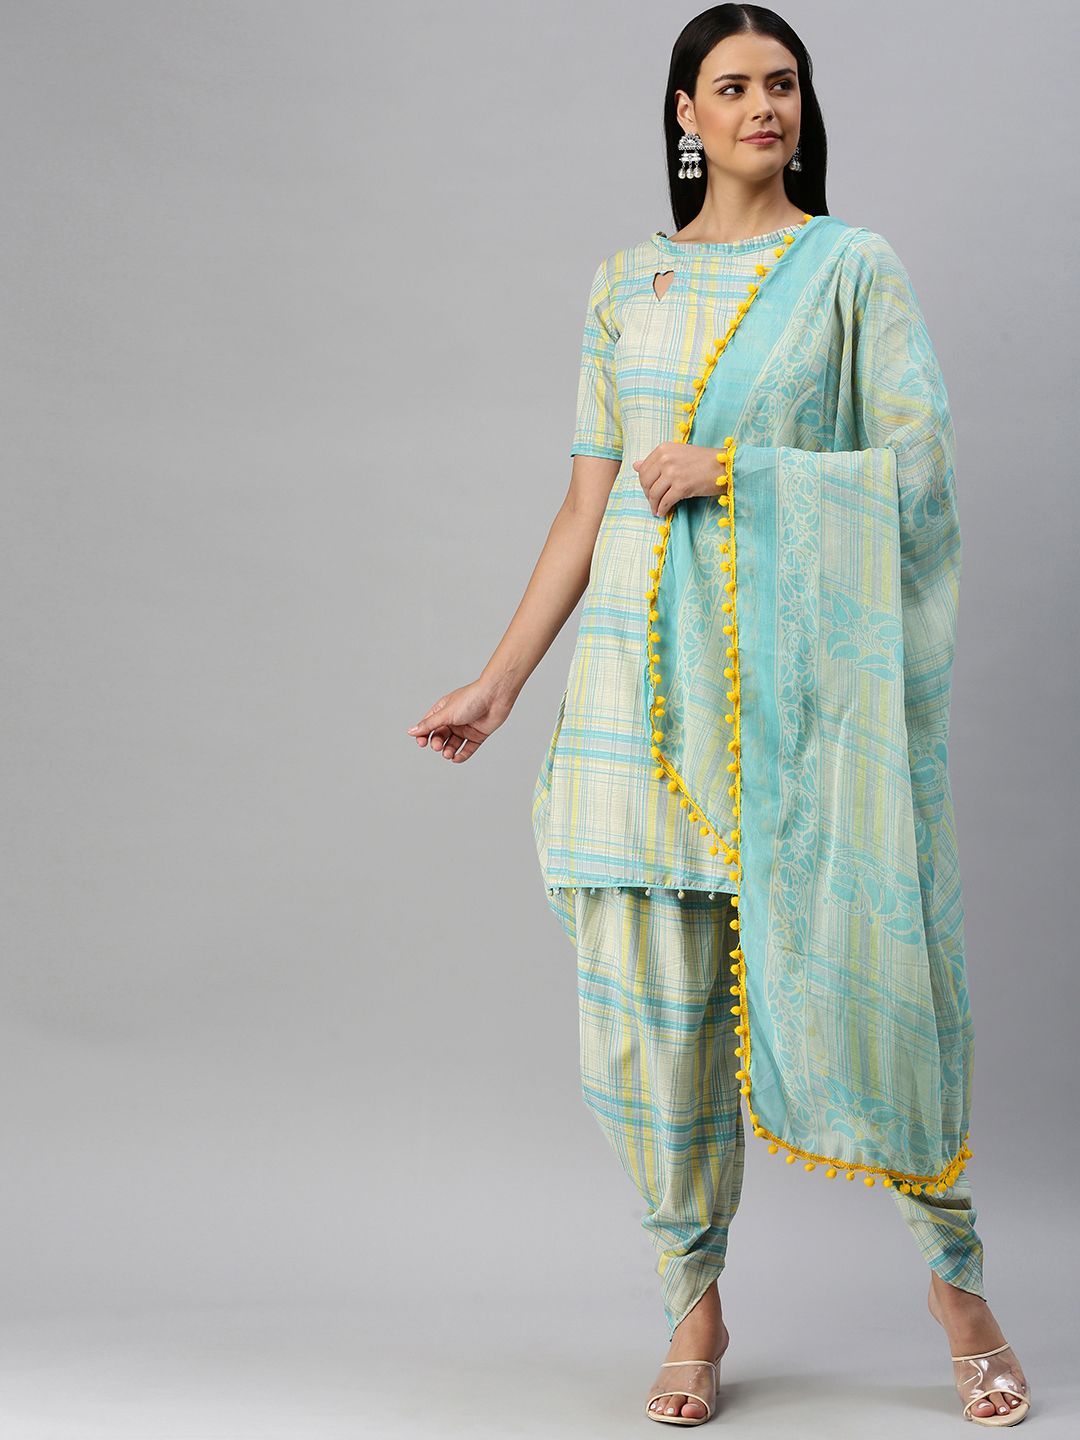 SHAVYA Turquoise Blue & Beige Checked Cotton Blend Unstitched Kurta Set Dress Material Price in India